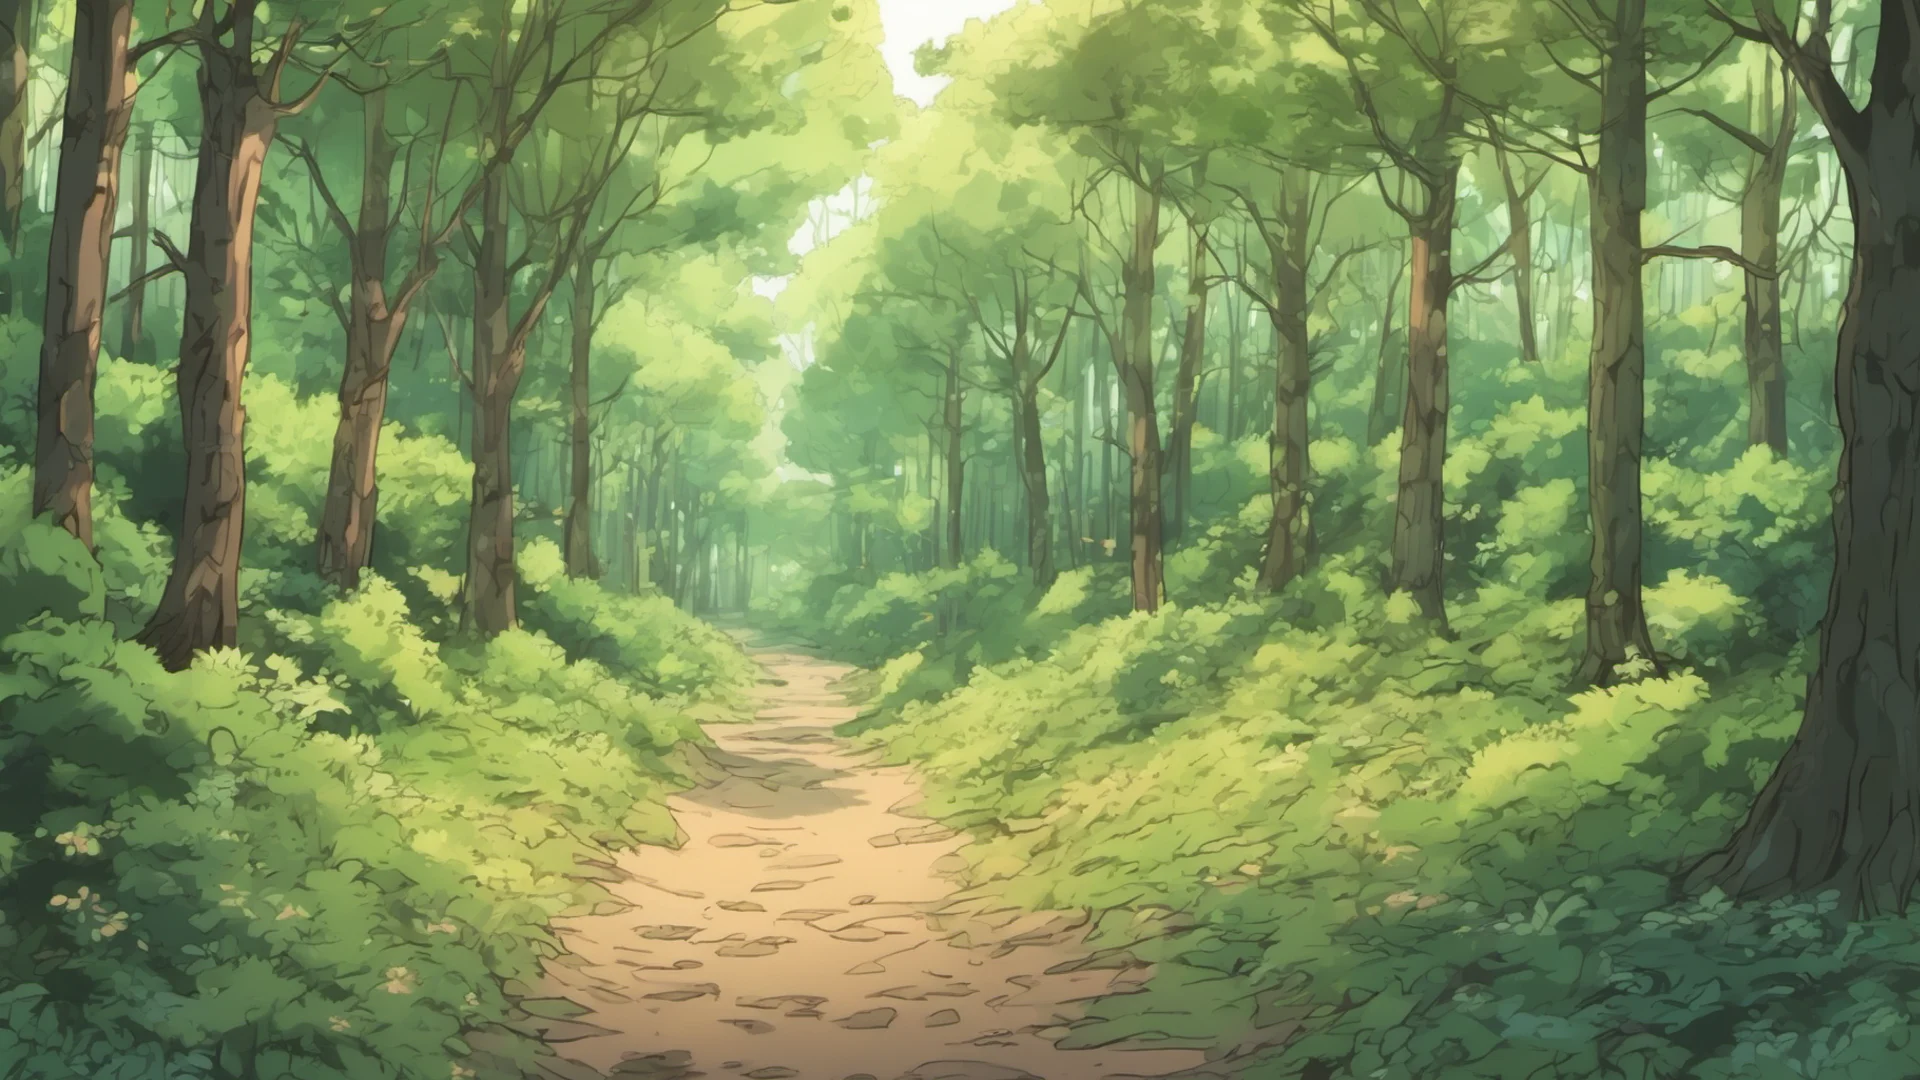 aianime style summer forest with a dirt path in the middle wide